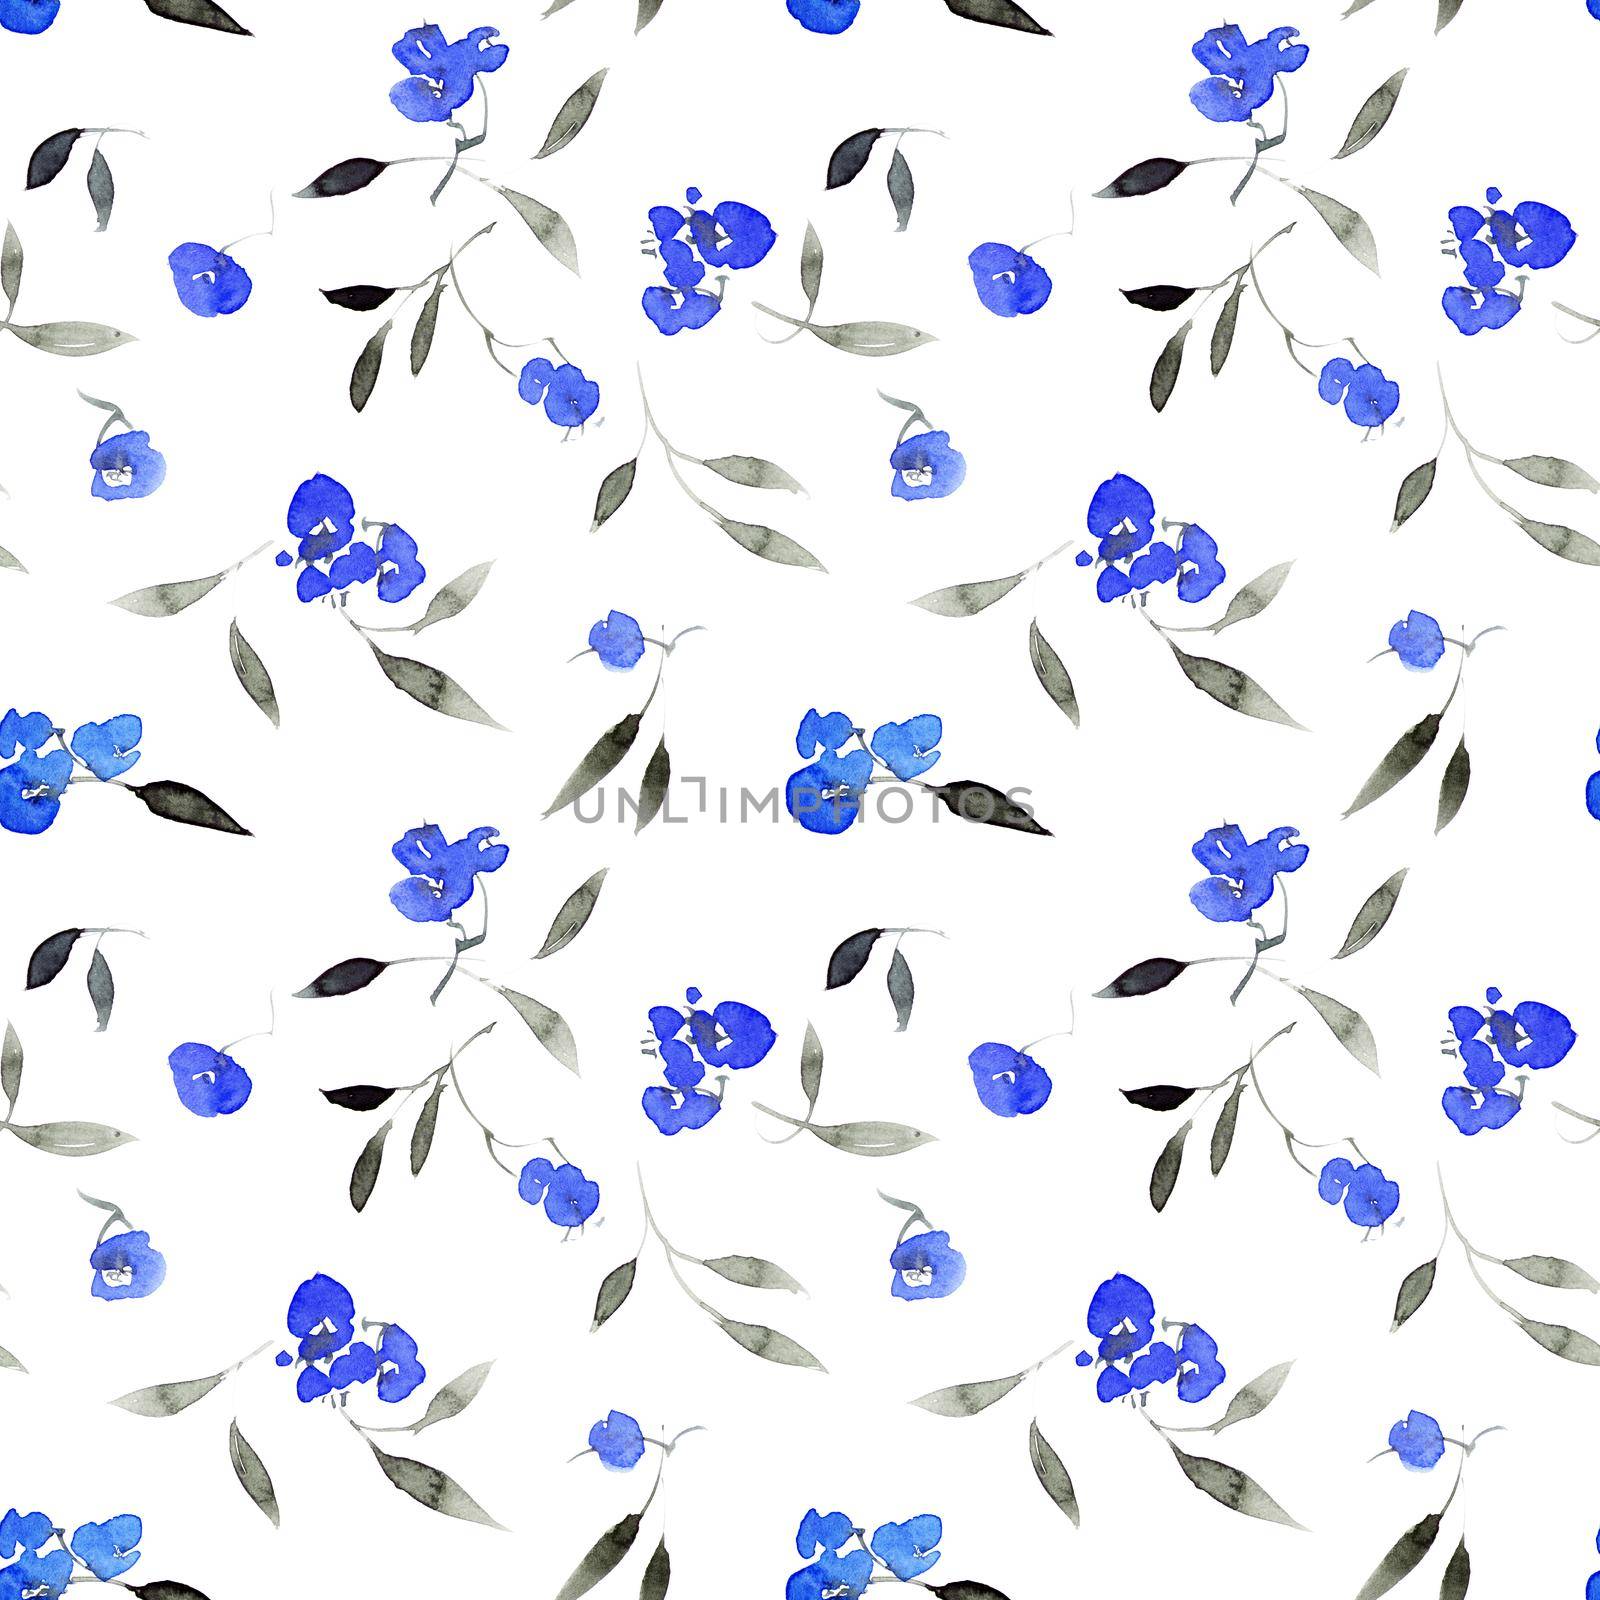 Watercolor seamless pattern of blue flowers and leaves. Oriental traditional painting in style sumi-e, u-sin and gohua.